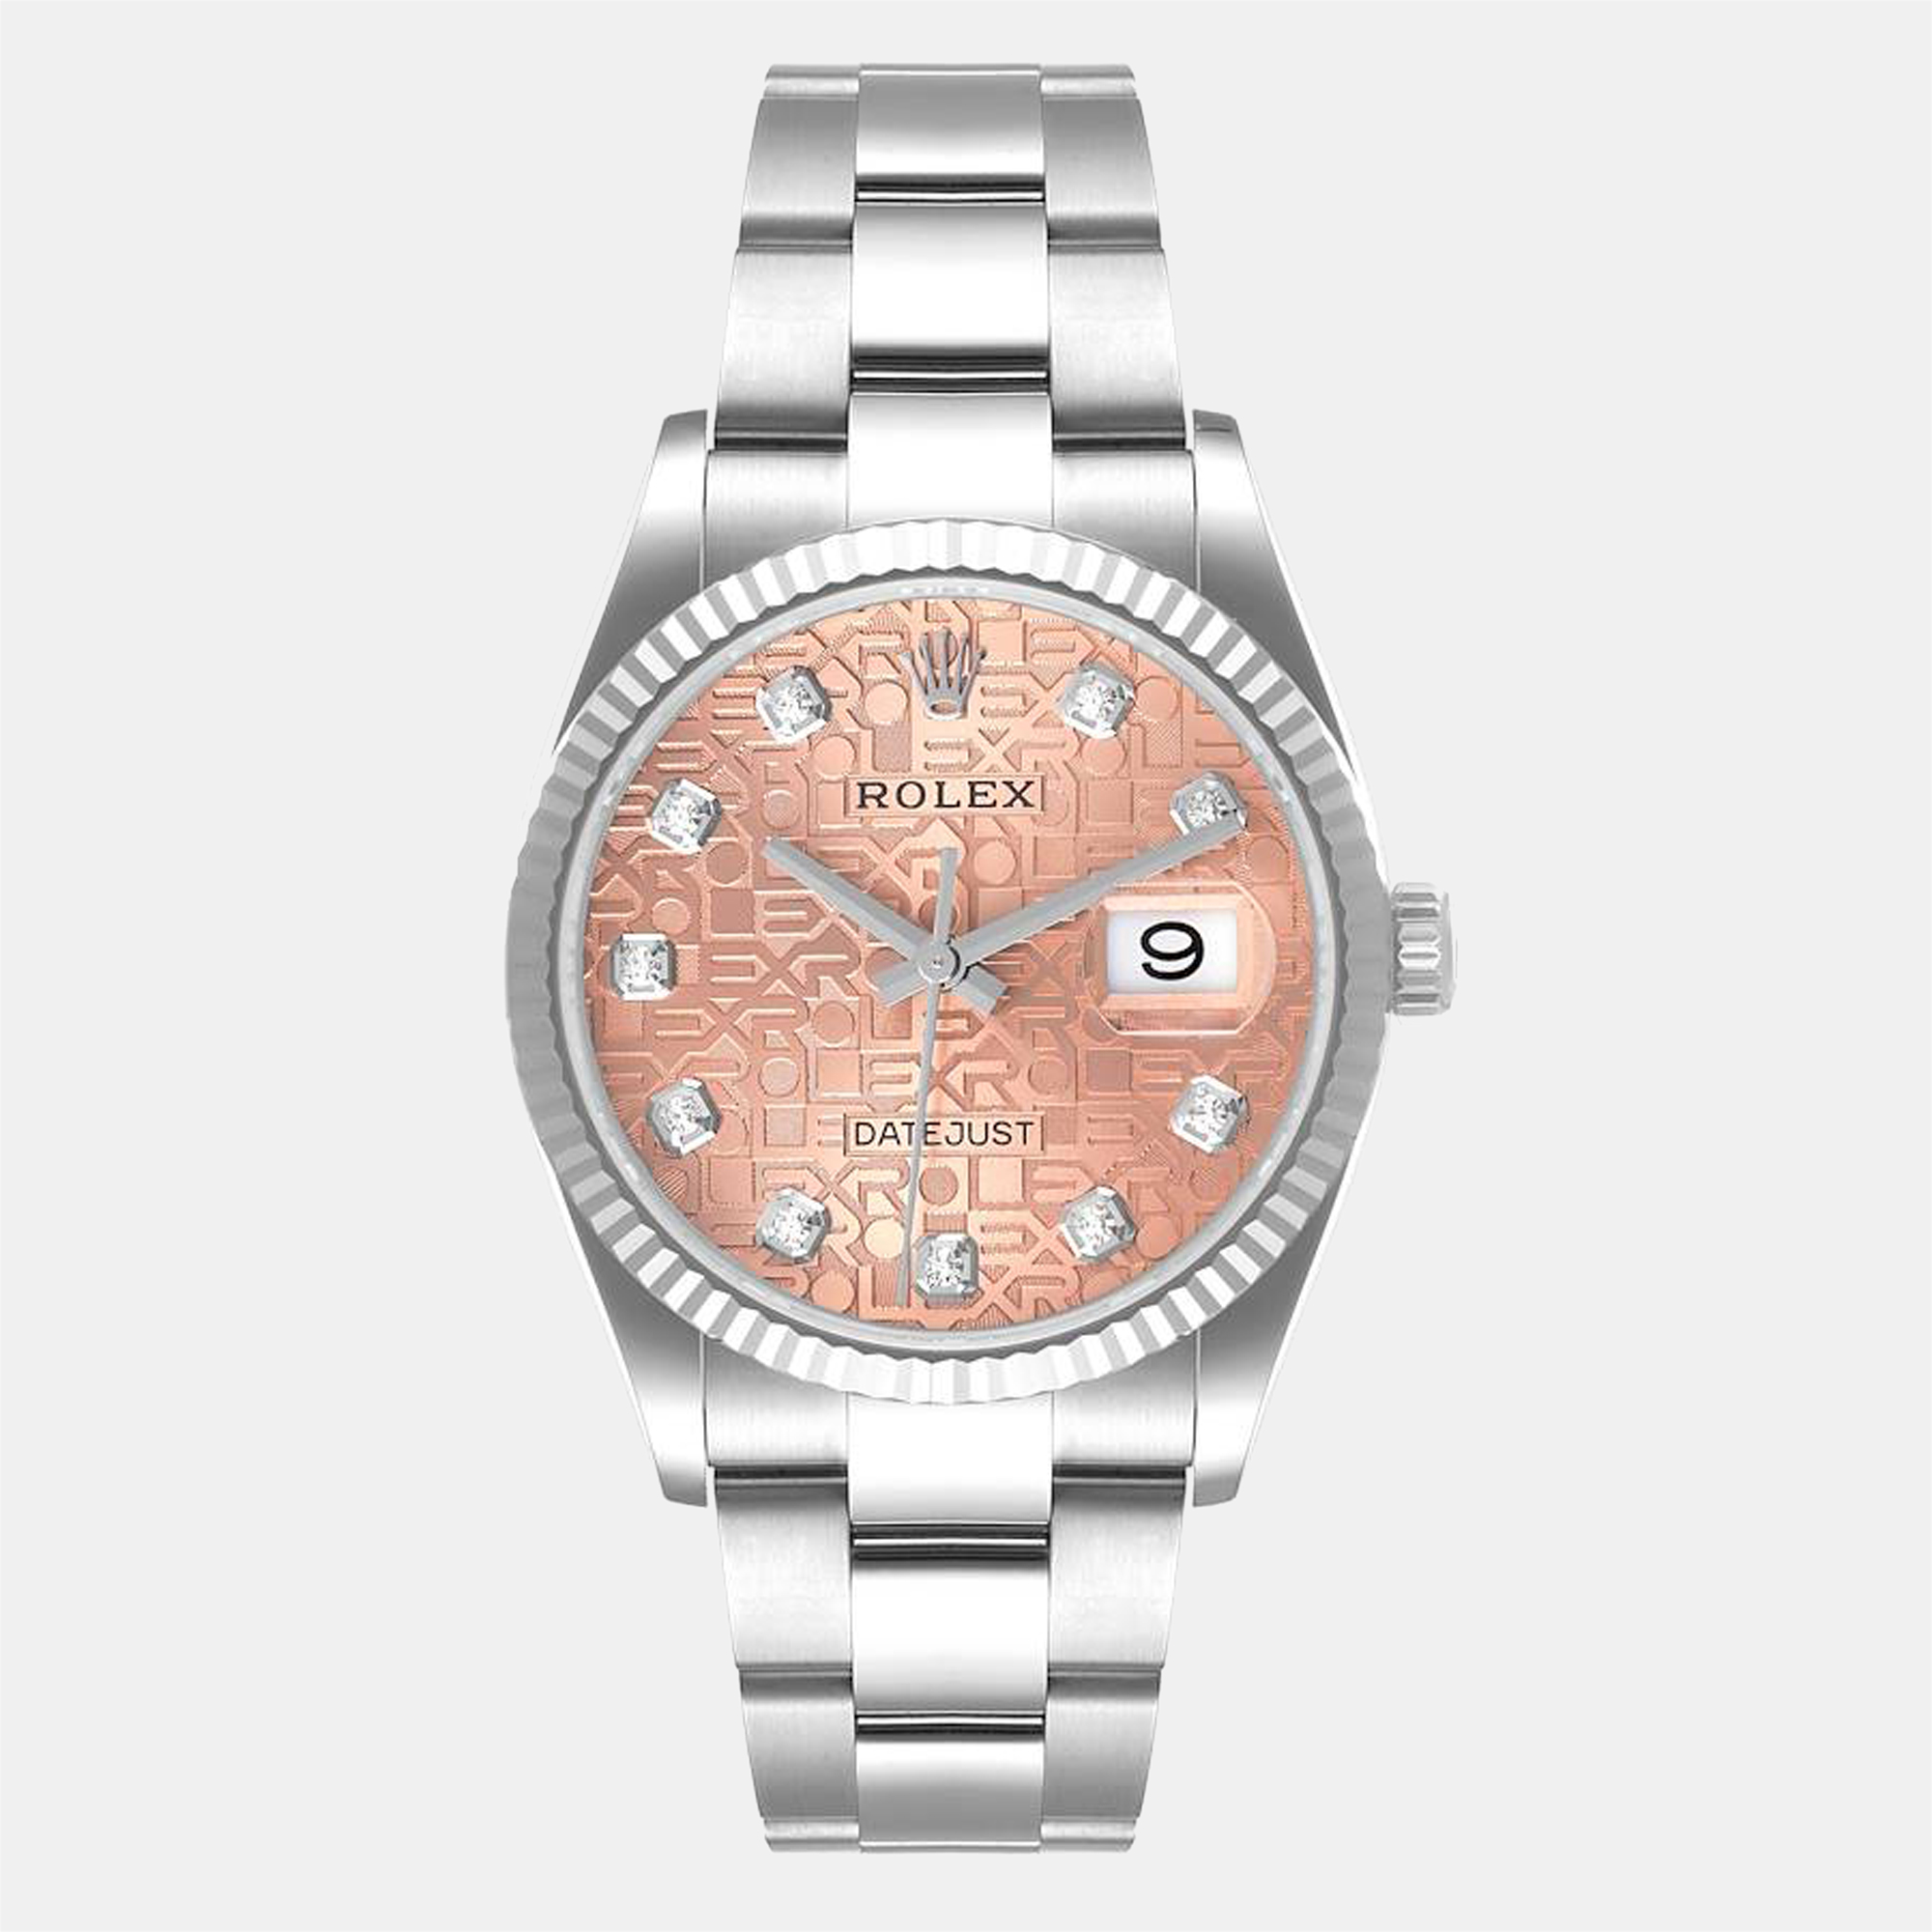 

Rolex Pink Diamonds 18K White Gold And Stainless Steel Datejust 126234 Automatic Men's Wristwatch 36 mm